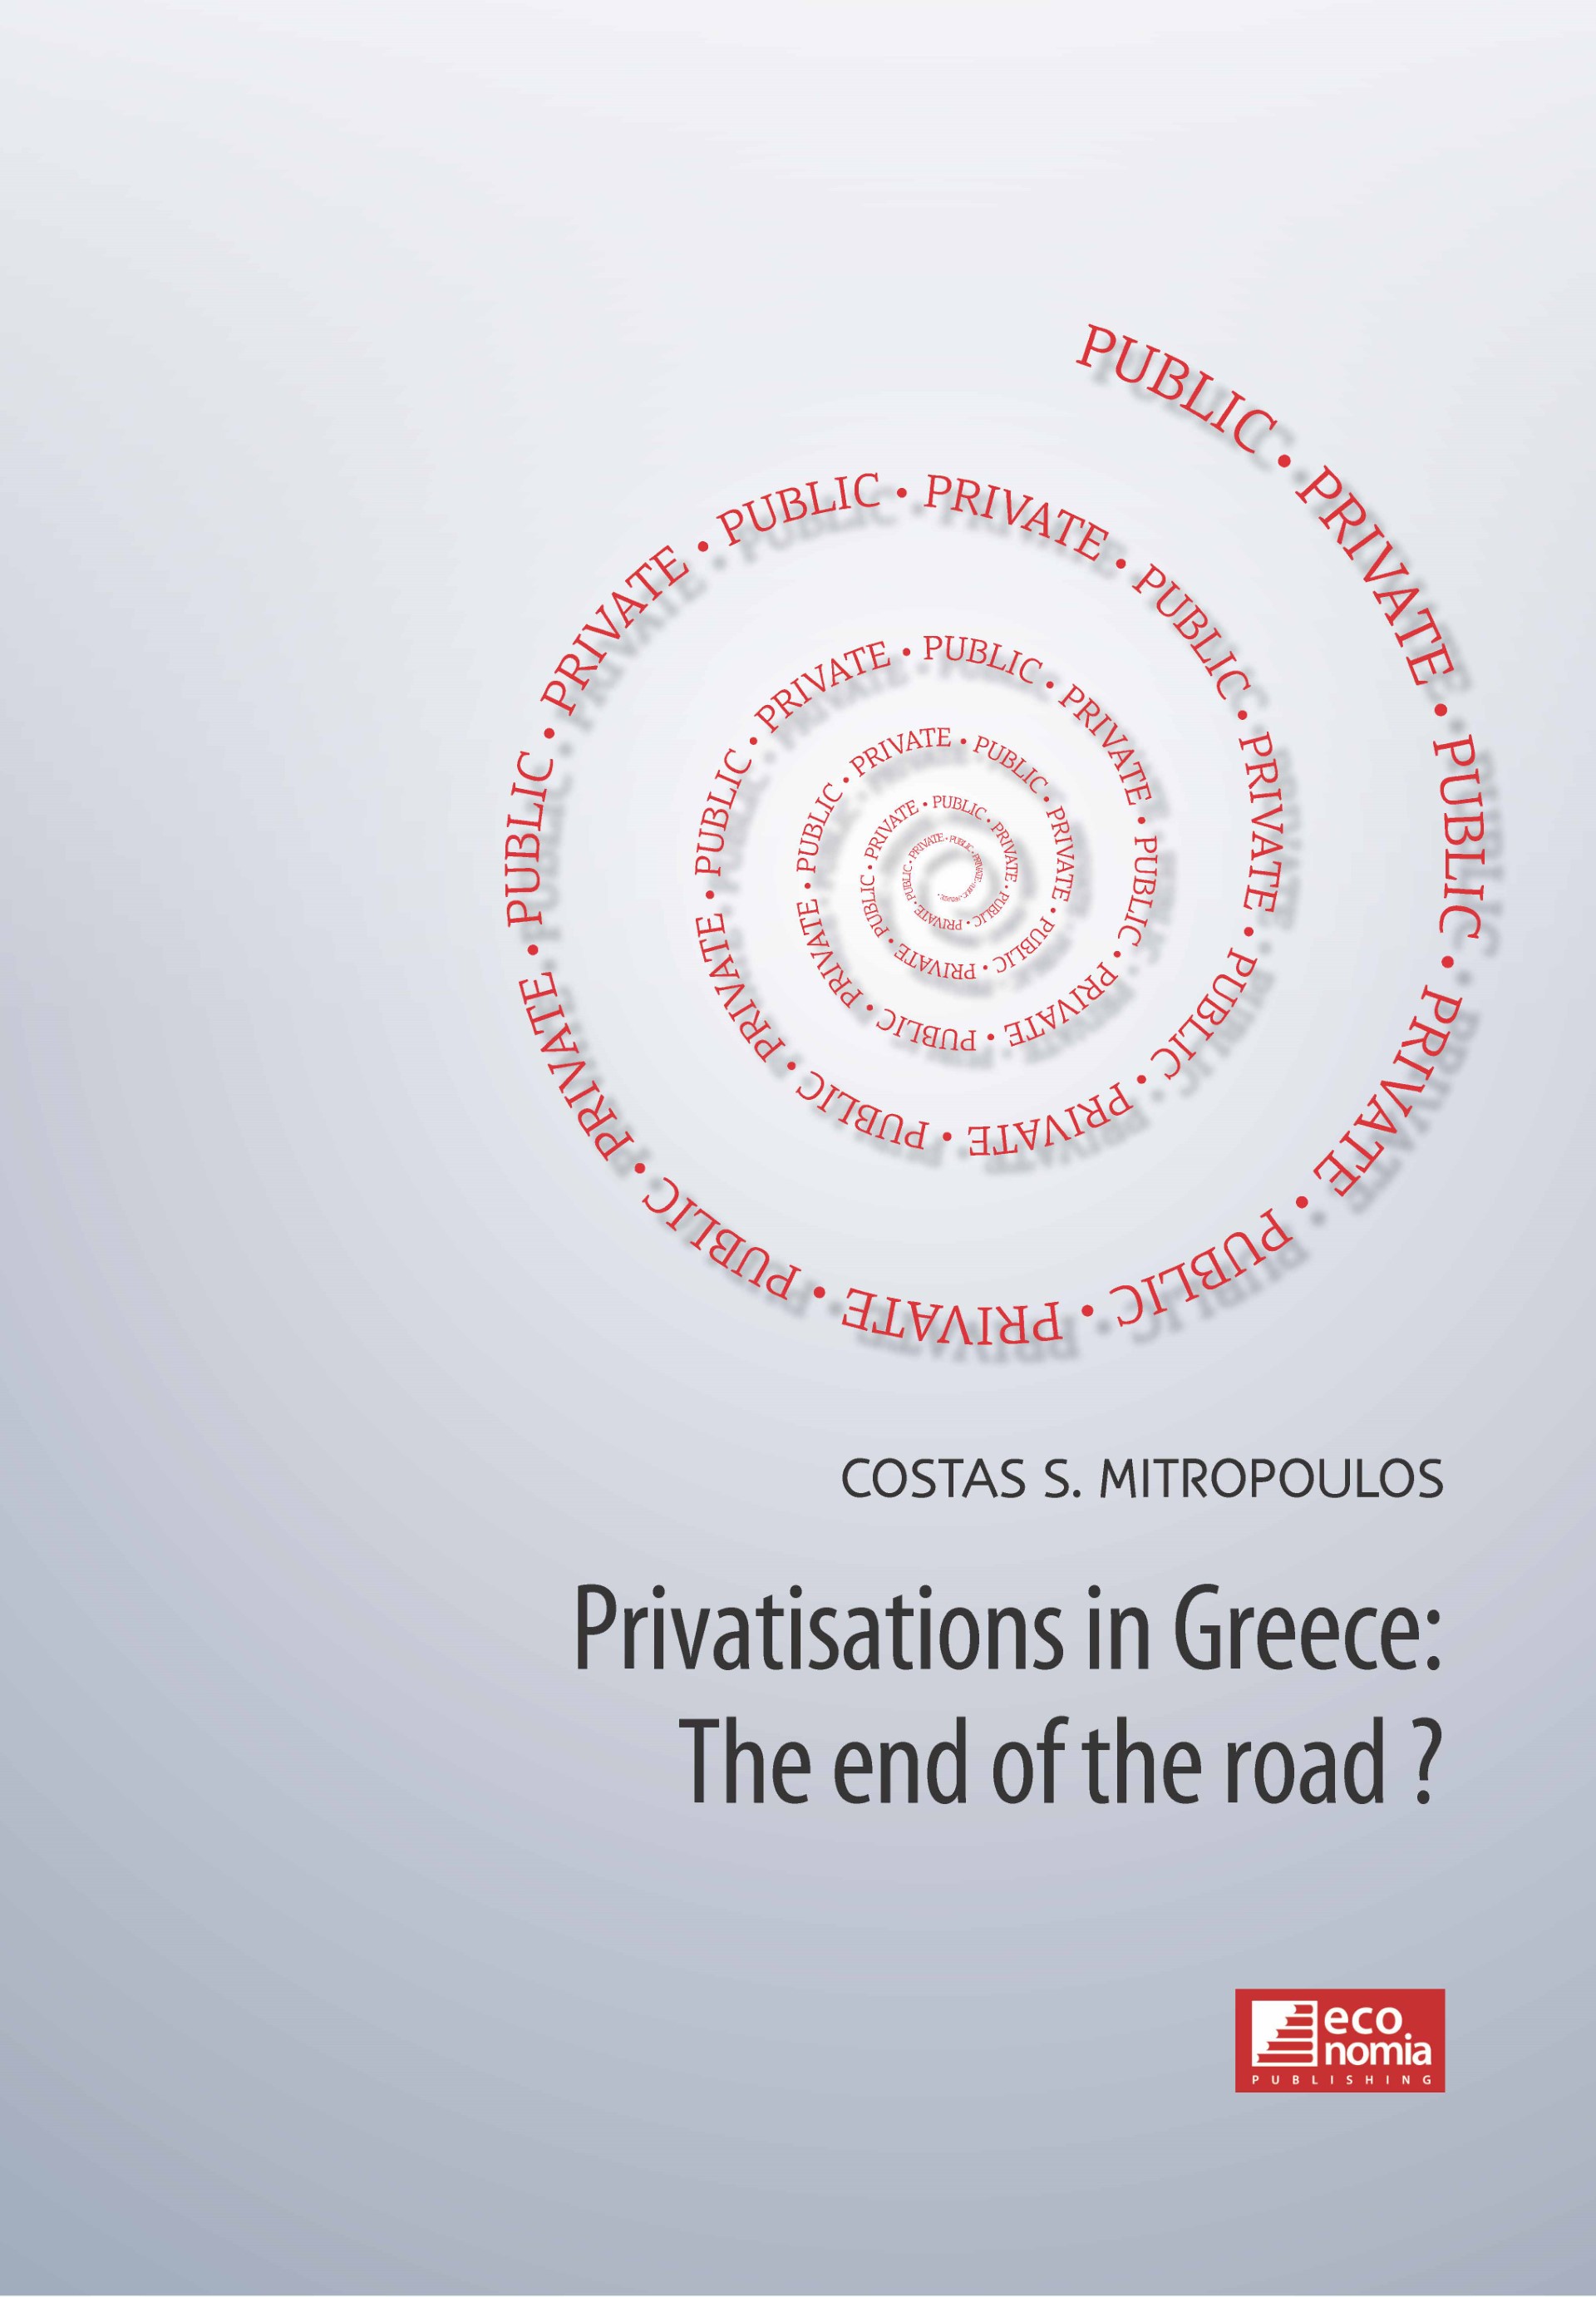 Privatisations in Greece: The end of the road?